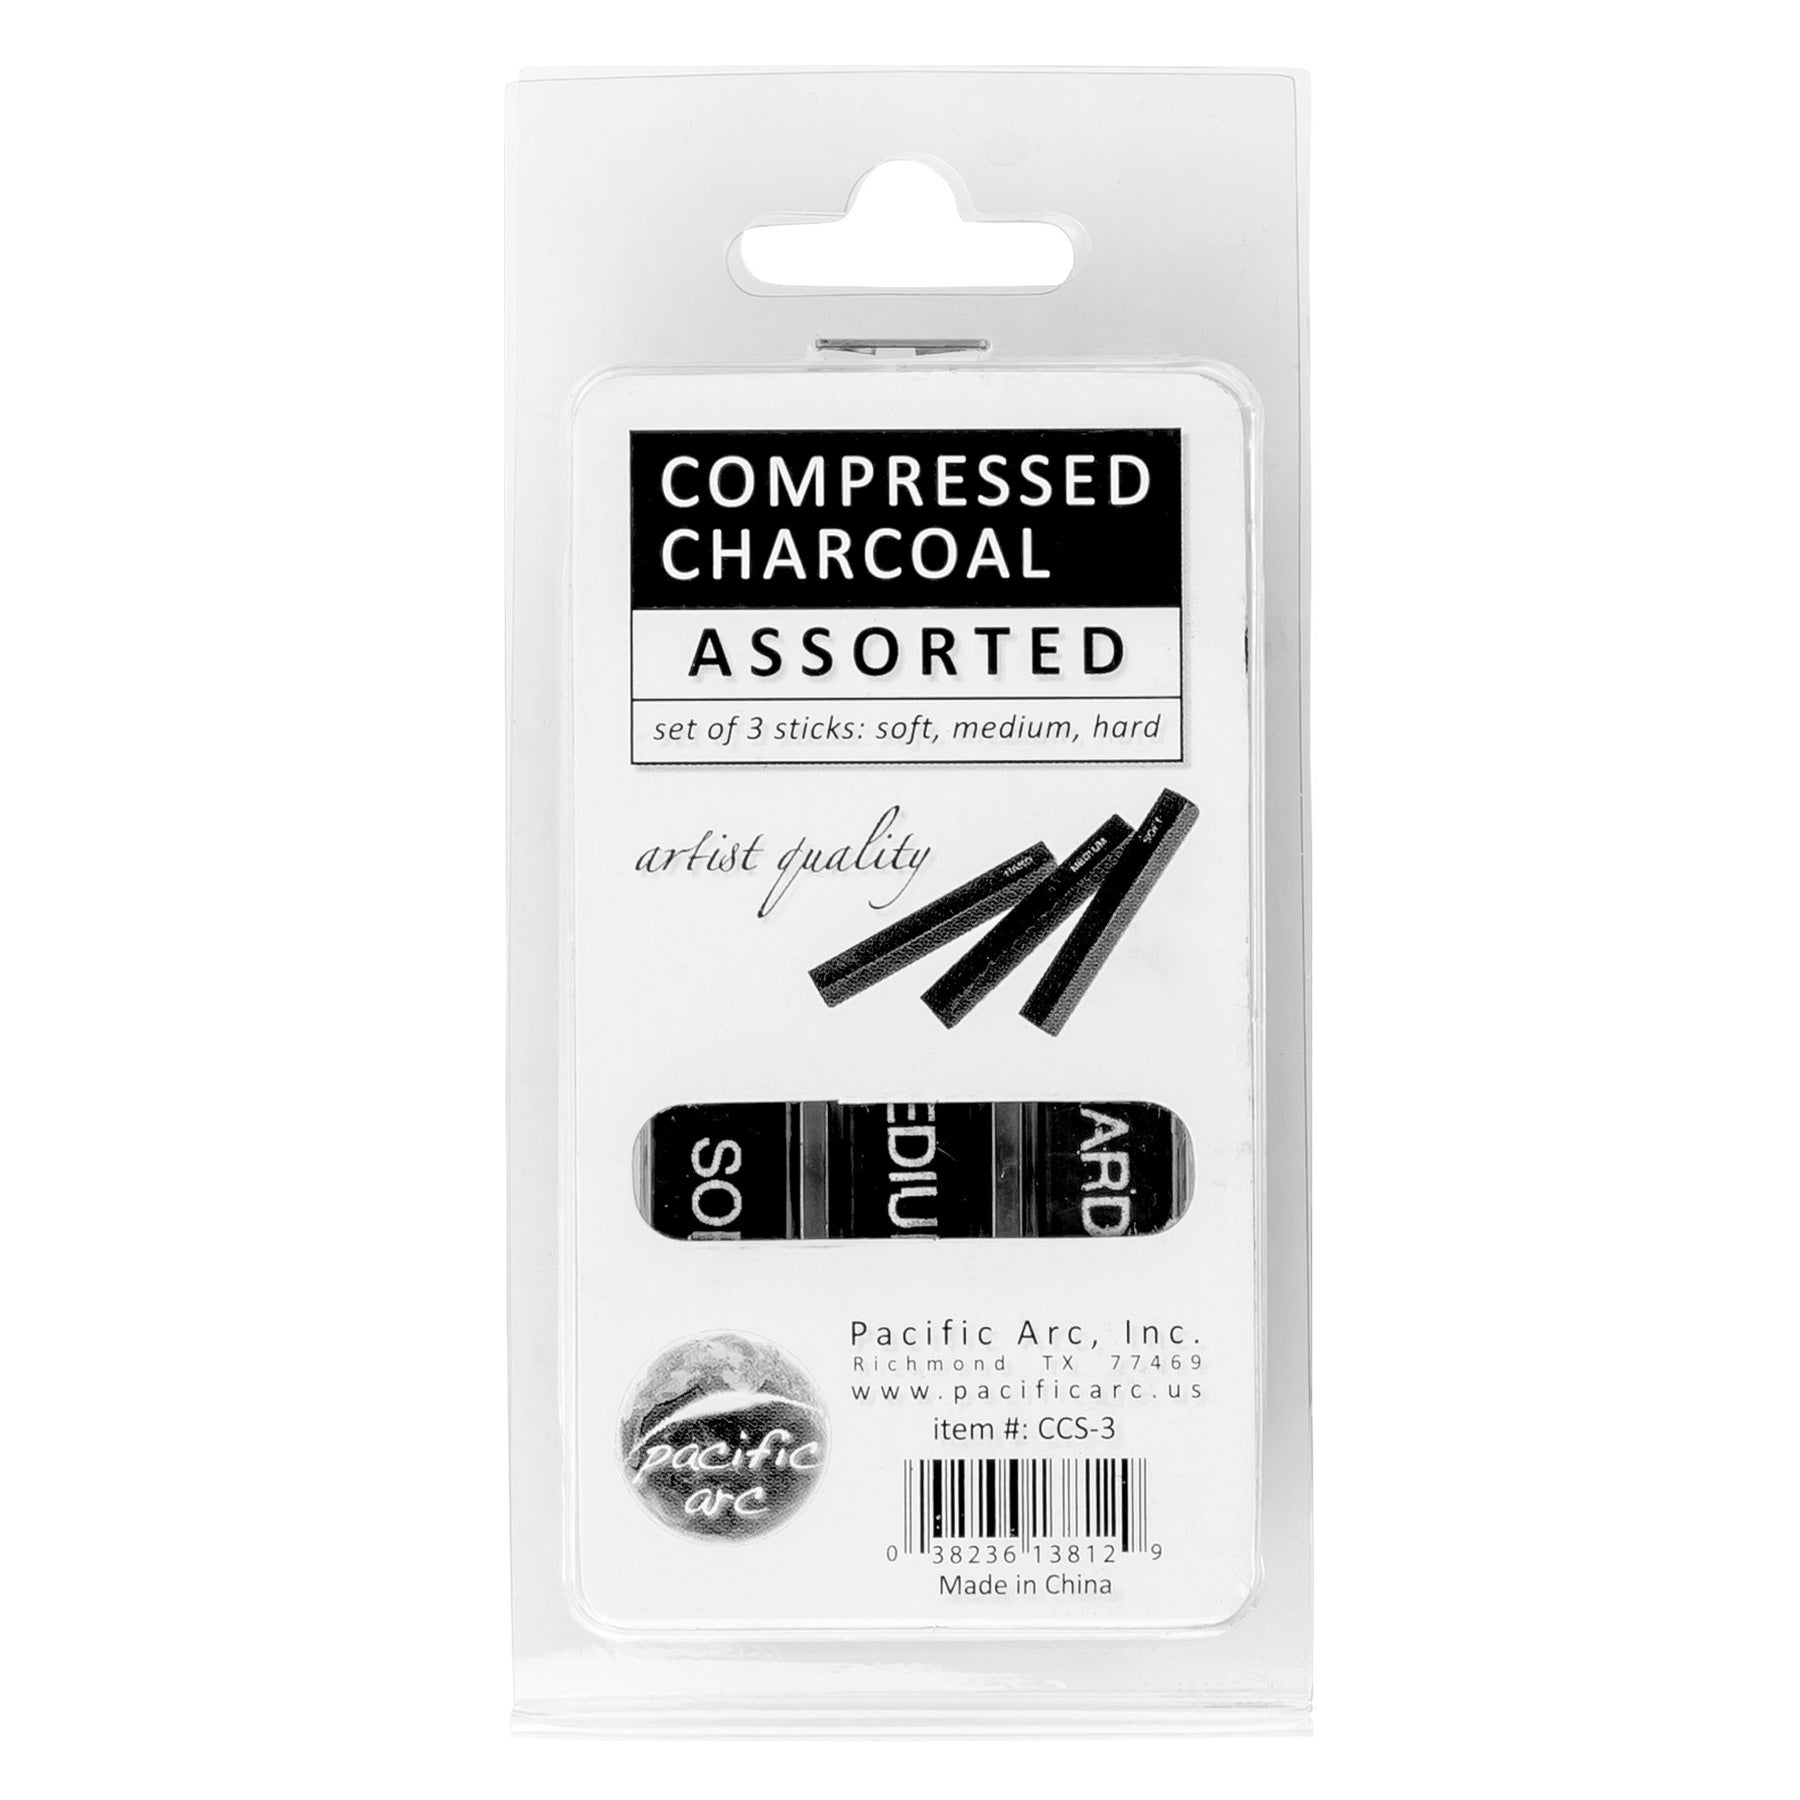 Pacific Arc Compressed Charcoal Sticks